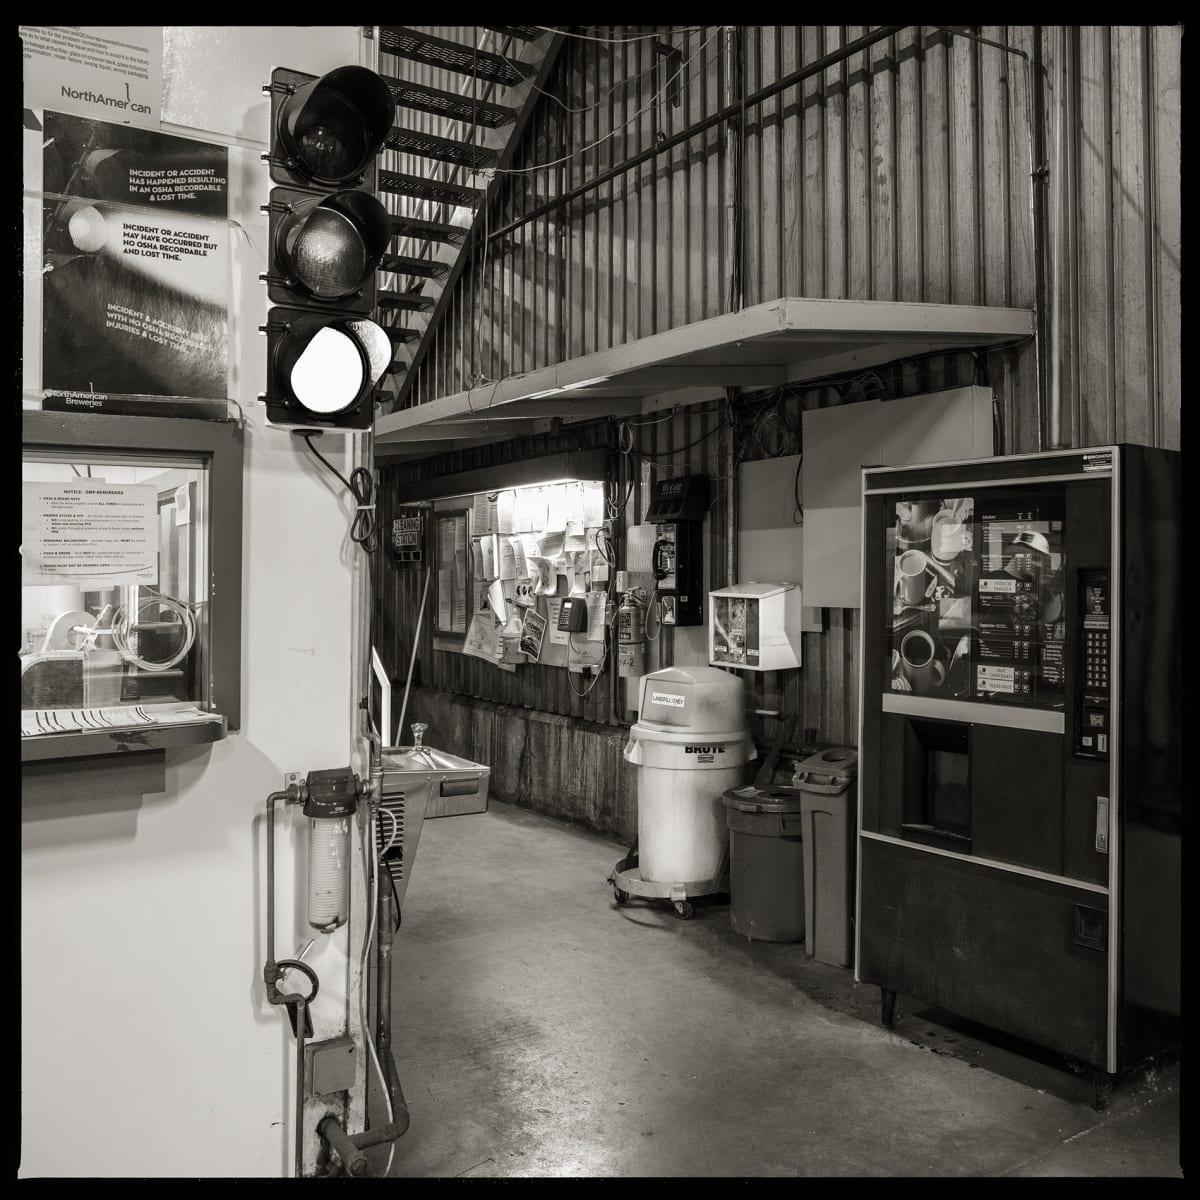 585.325.9325 – High Falls Brewing Company, 445 Saint Paul Street, Building #14, Rochester, NY 14605 by Eric T. Kunsman  Image: ID: A black and white image shows a door way room with a vending machine to the right and a window to the left.  There is a stoplight on the entrance way and a payphone between the window and vending machine.